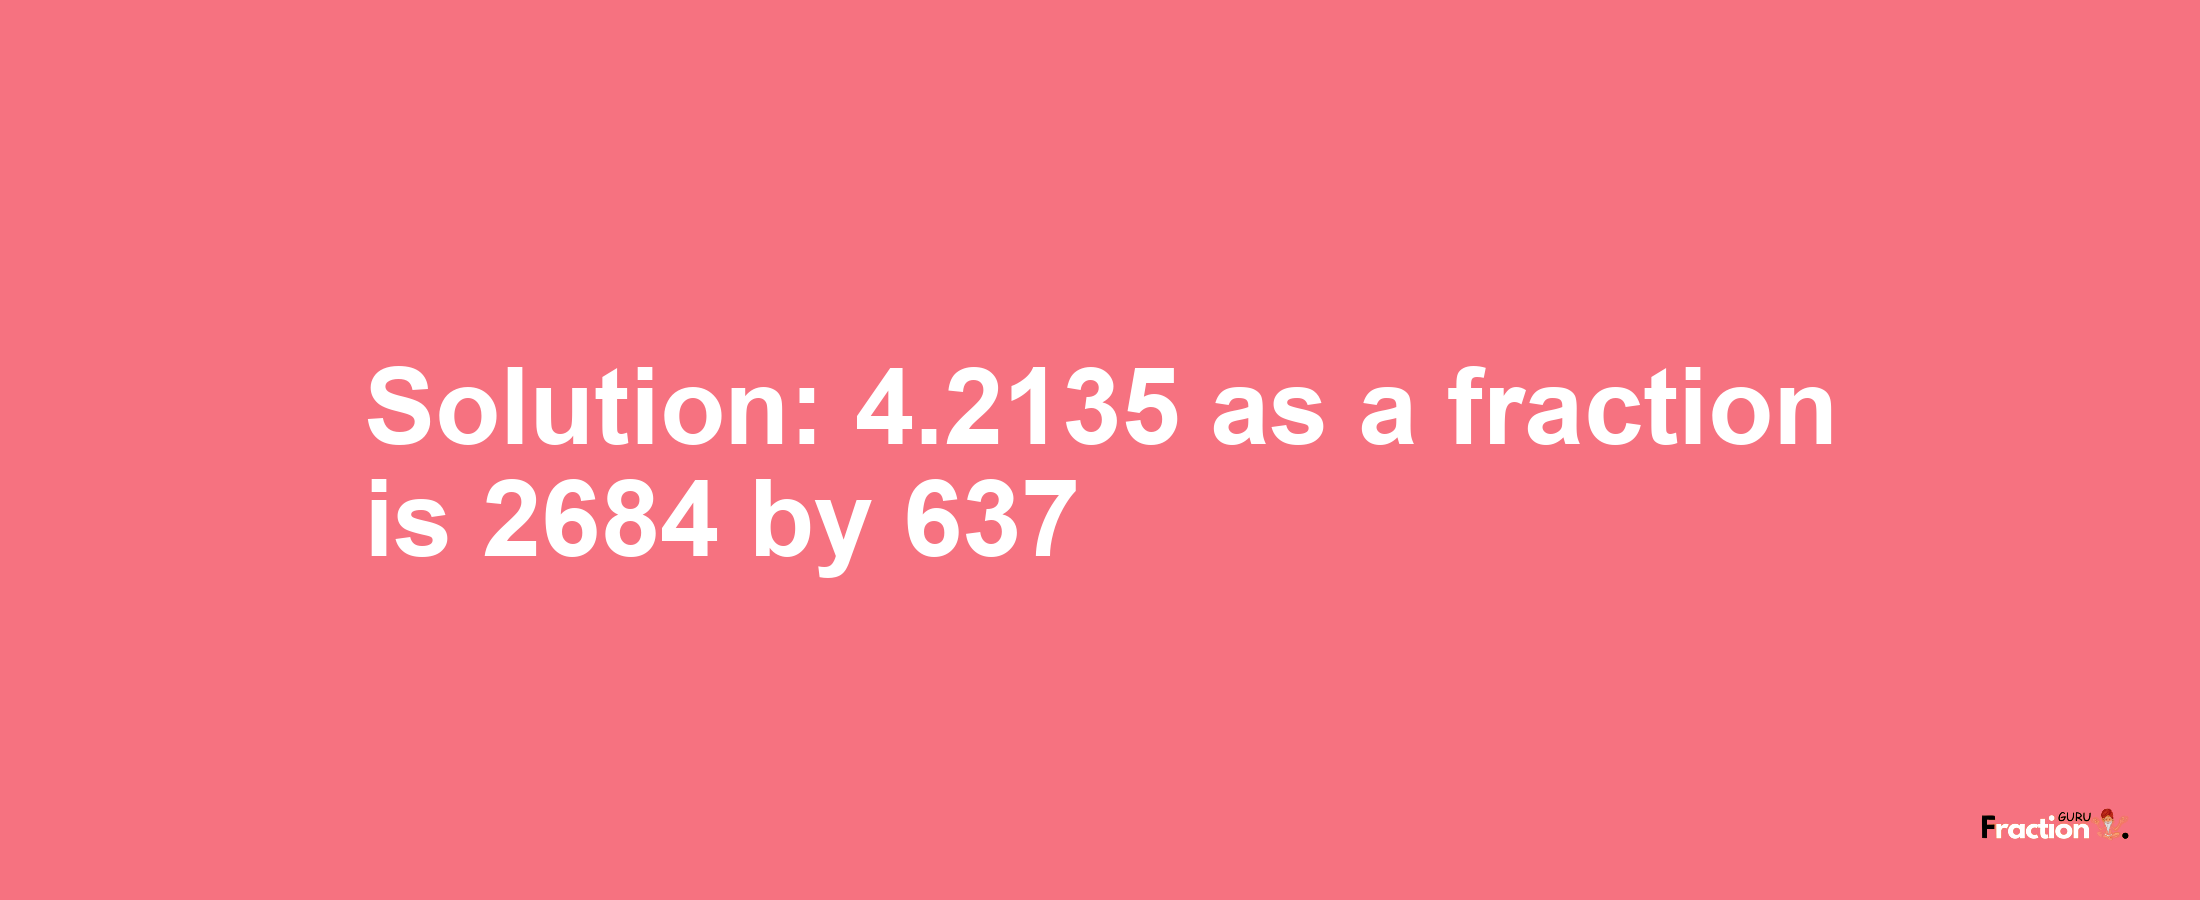 Solution:4.2135 as a fraction is 2684/637